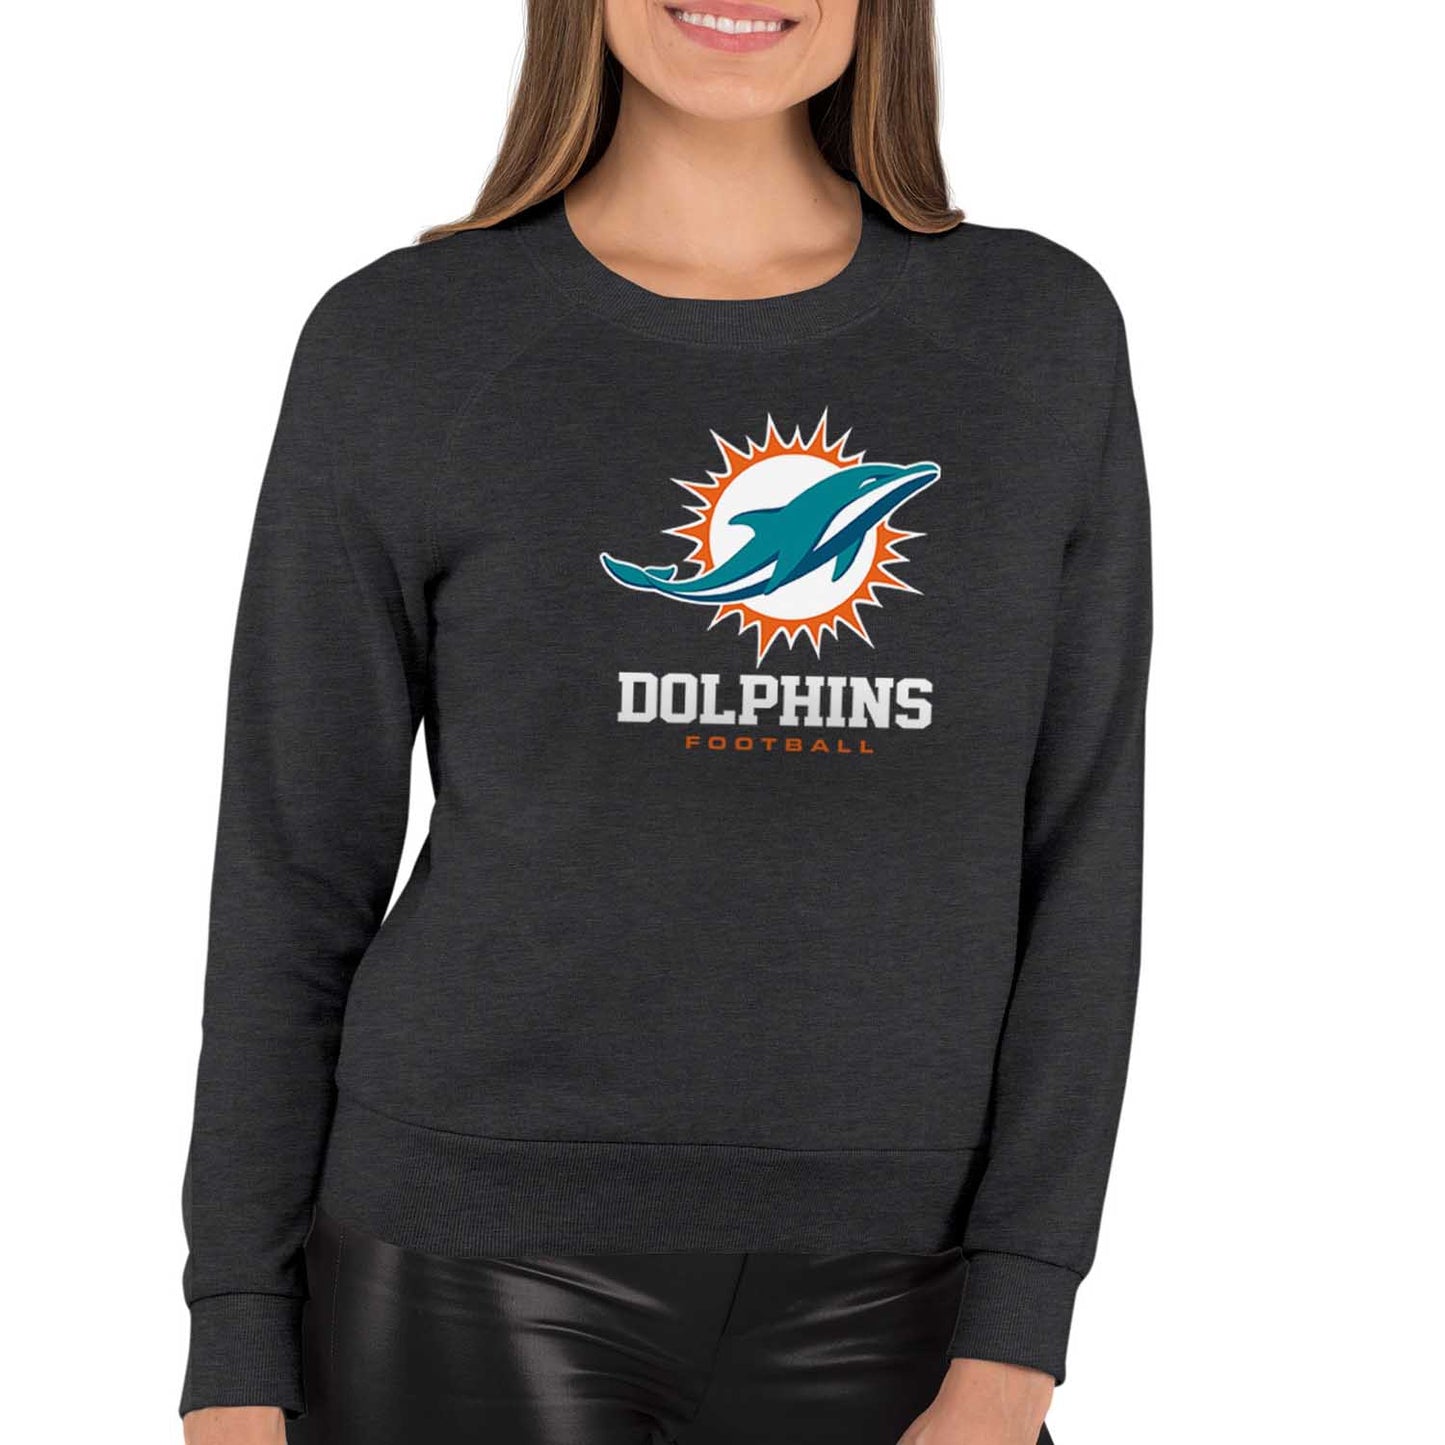 Miami Dolphins Women's NFL Ultimate Fan Logo Slouchy Crewneck -Tagless Fleece Lightweight Pullover - Charcoal